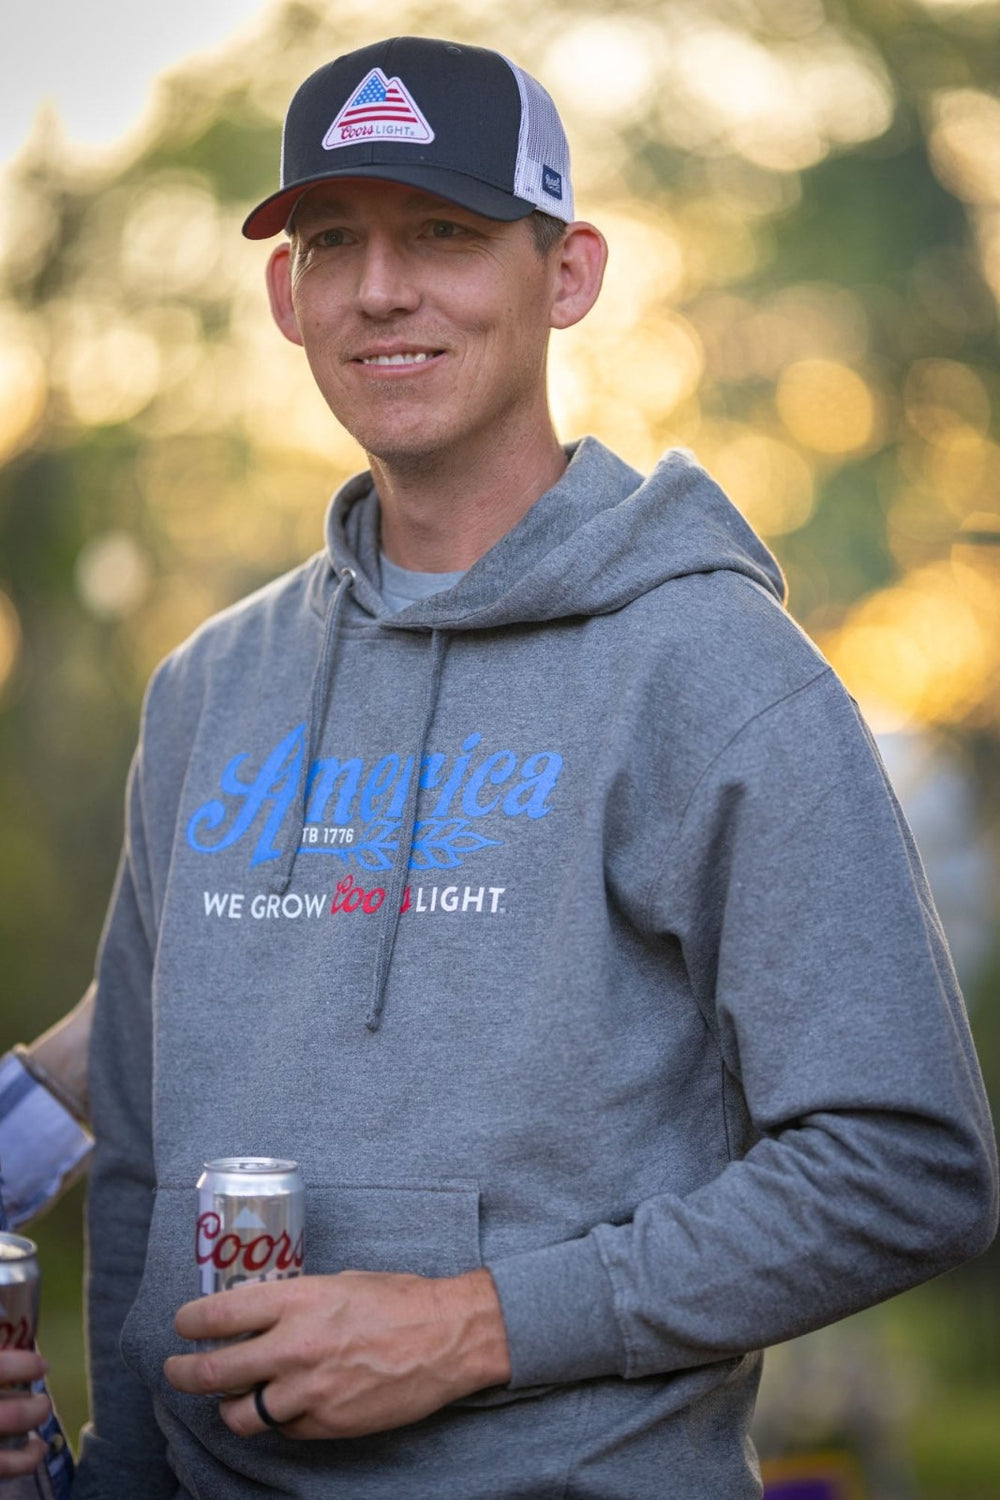 A person wearing the We Grow Coors Light Pullover in gray from Rural Cloth and a black-and-red baseball cap is holding a can of Coors Light, the iconic Silver Bullet. The background appears to be an outdoor setting with blurred greenery and sunset light.